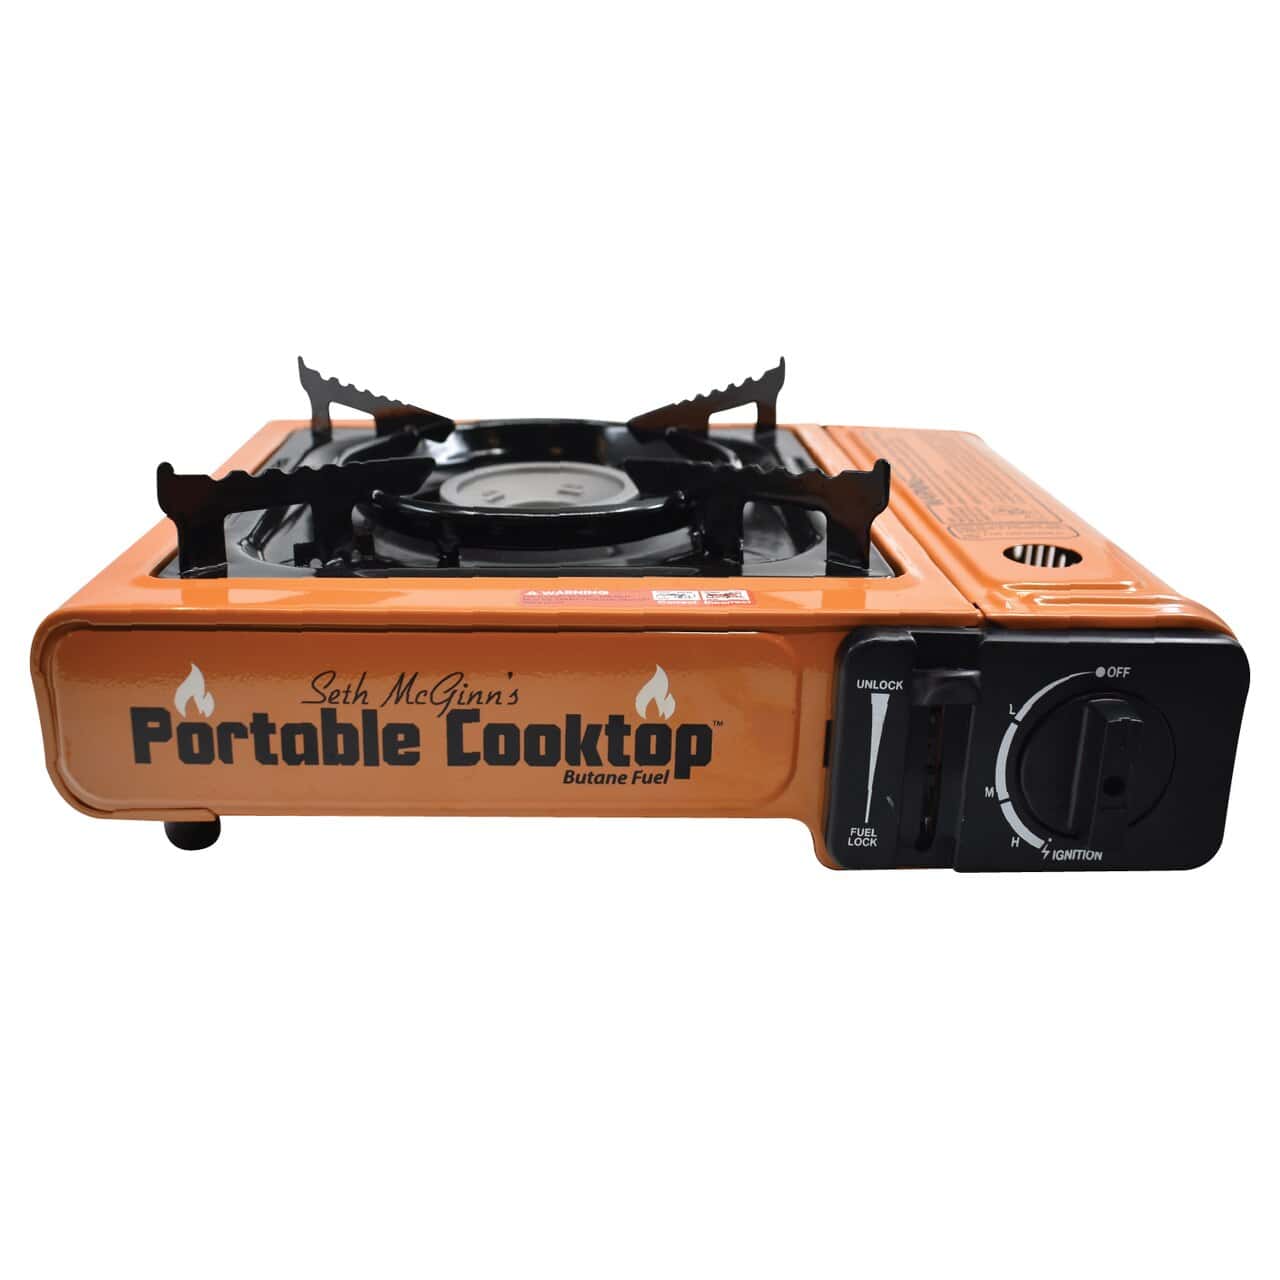 https://www.cancooker.com/wp-content/uploads/2019/12/products-PortableCooktop__24607.1575760805.1280.1280.jpg